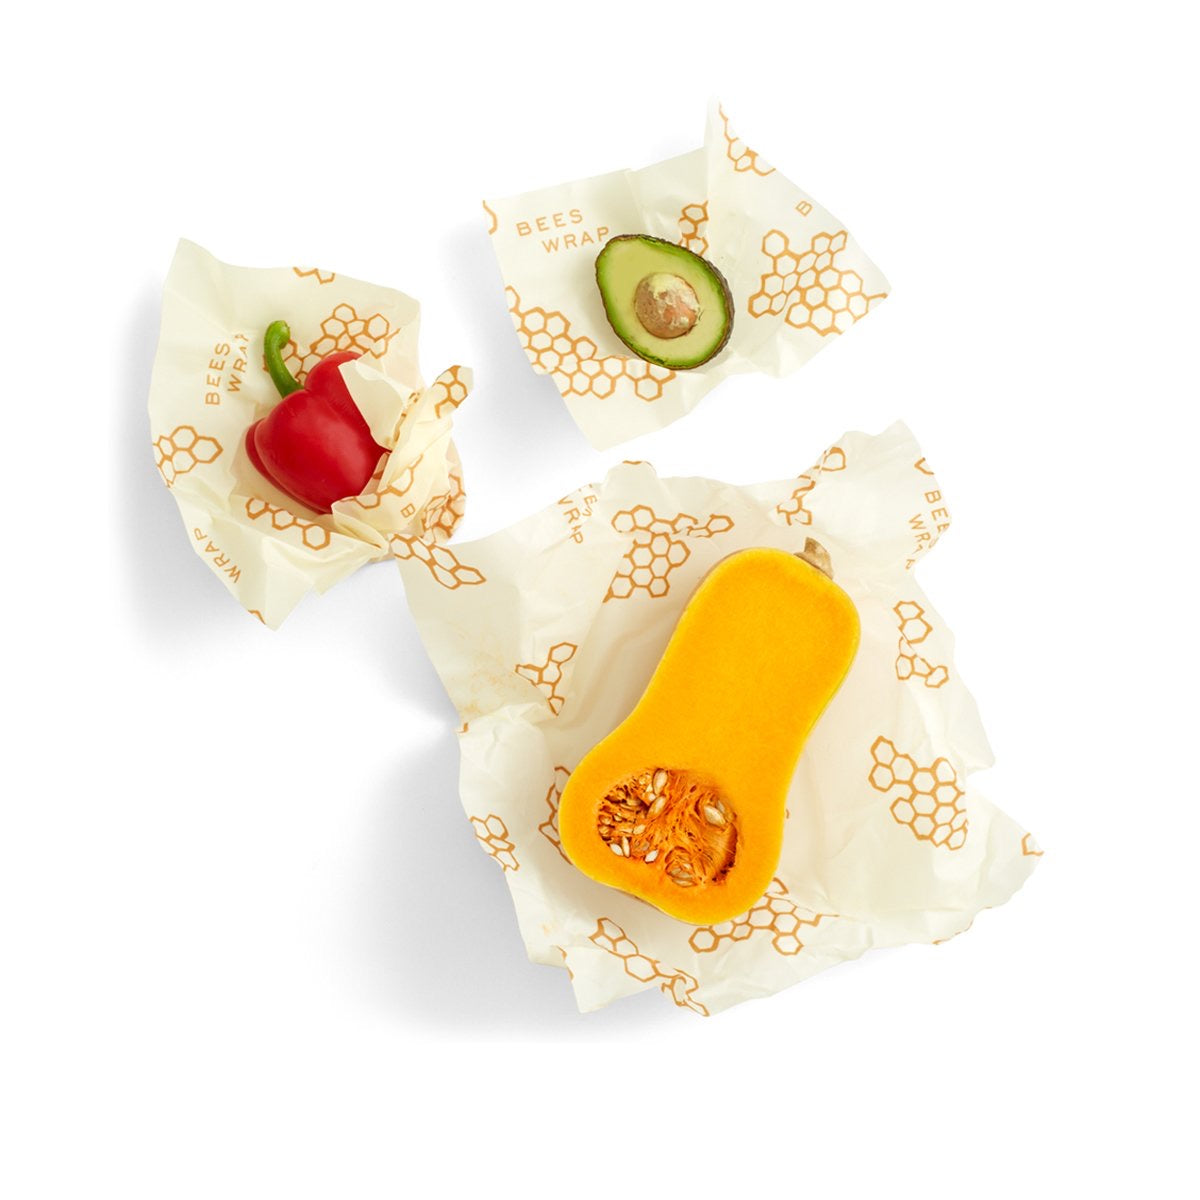 Bees wrap - assorted 3 pack